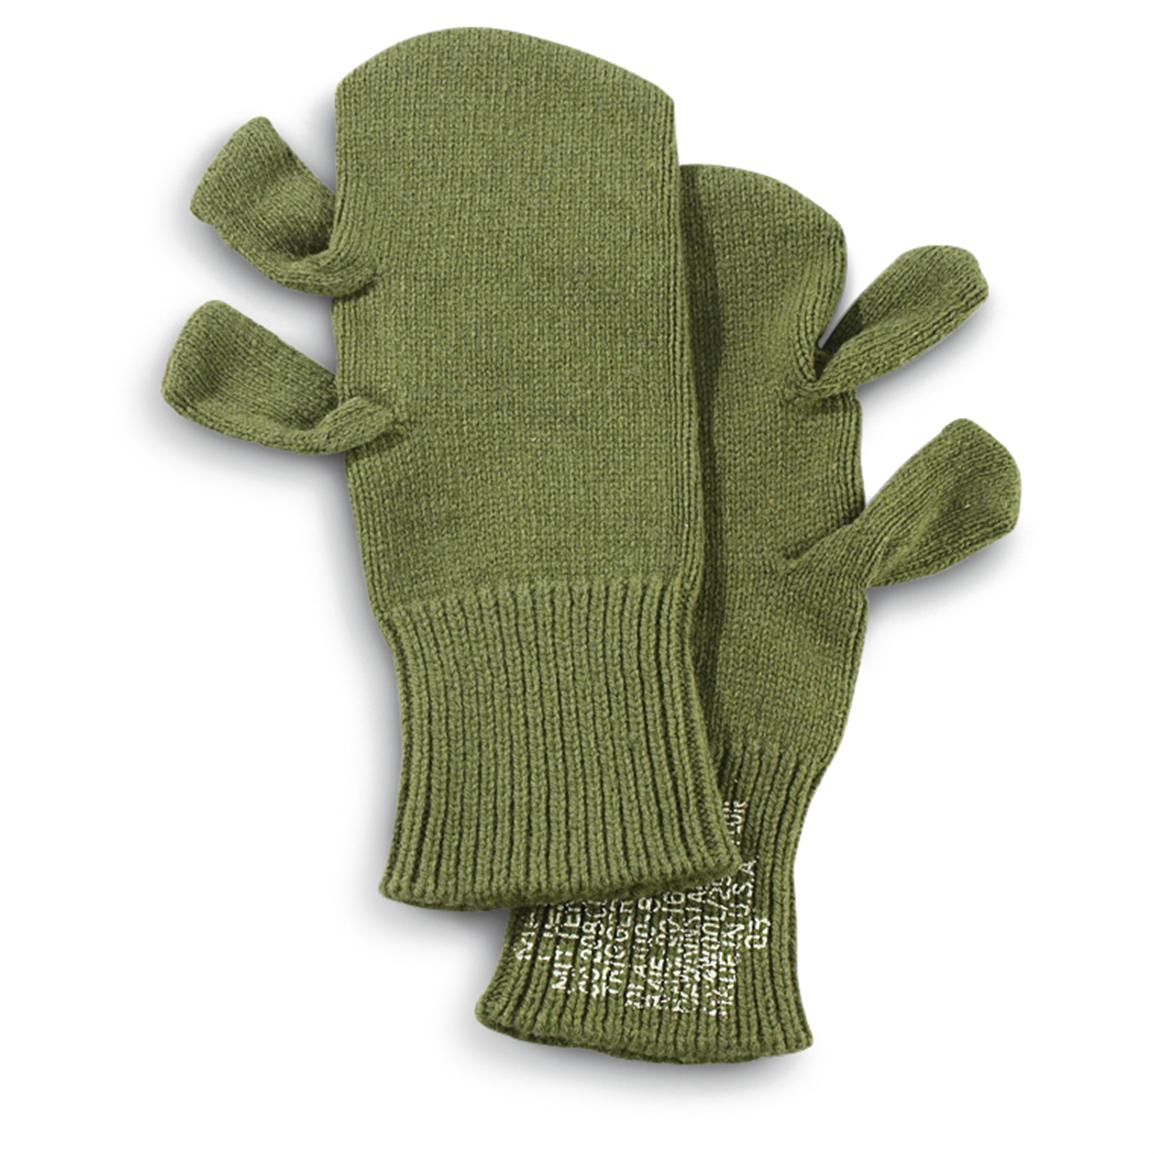 NEW 3 PAIR US MILITARY SURPLUS WOOL BLEND TRIGGER FINGER MITTENS INSERTS SZ MED